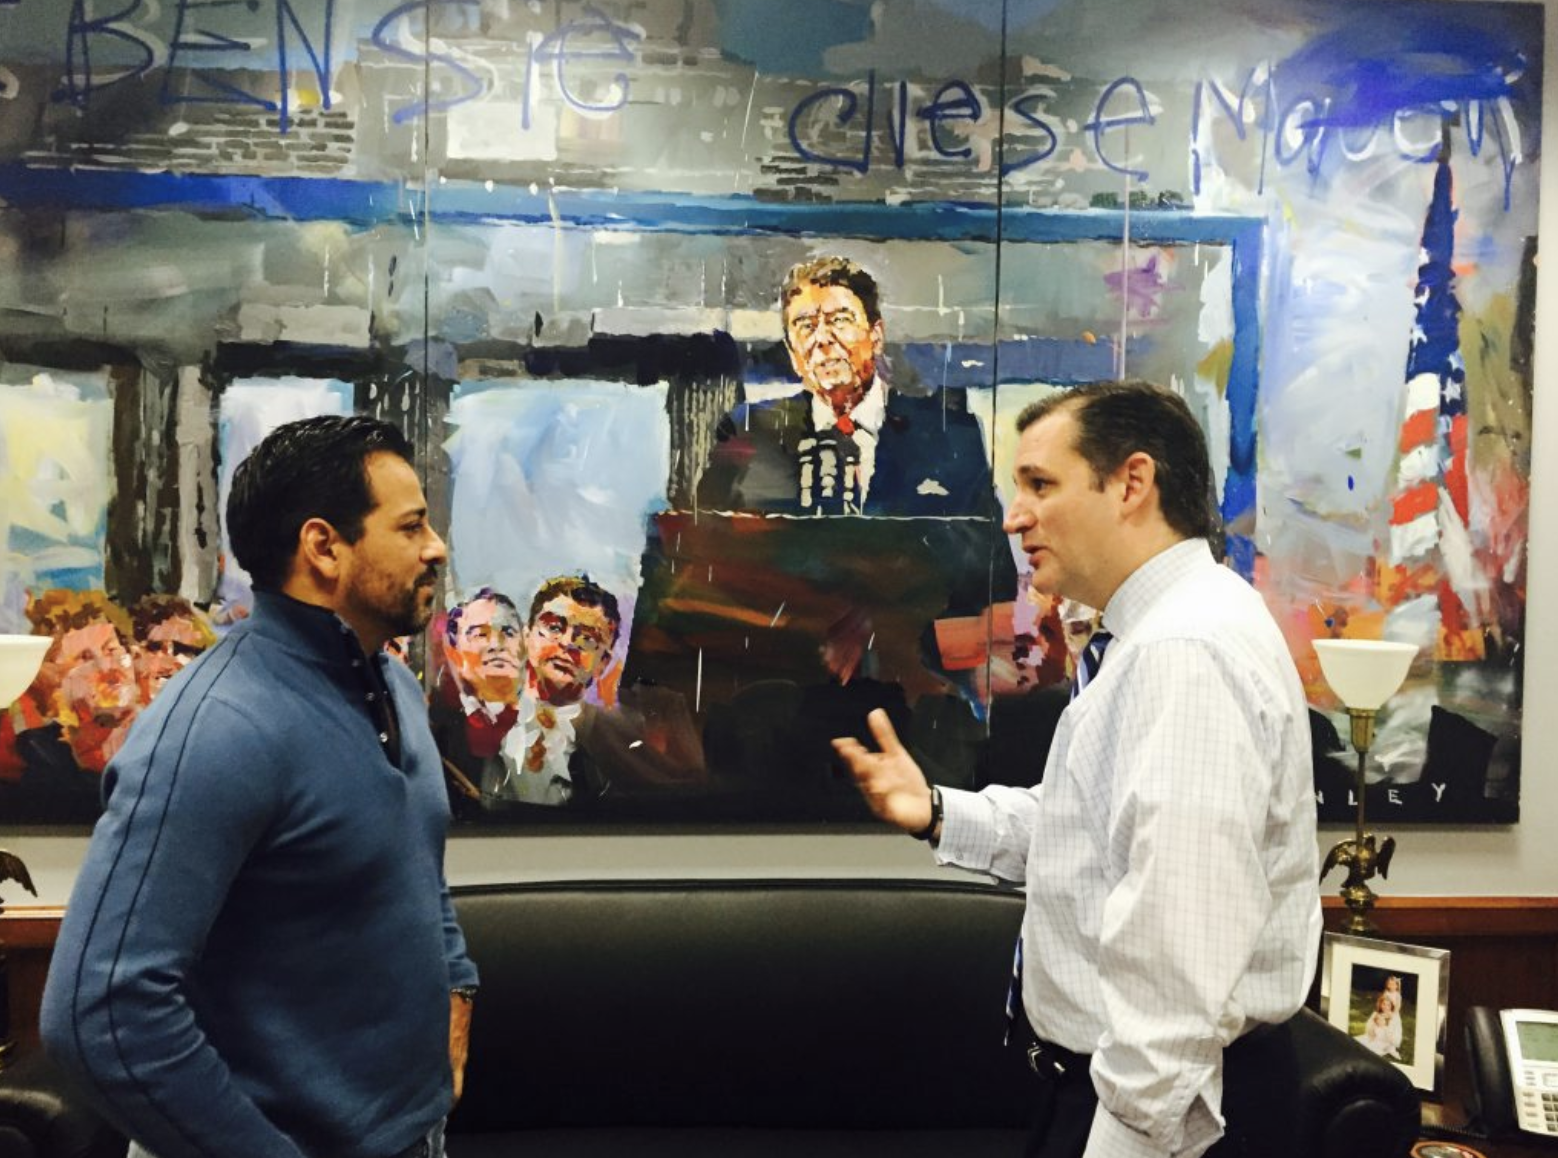 Ted Cruz requests copy of hellish painting of himself